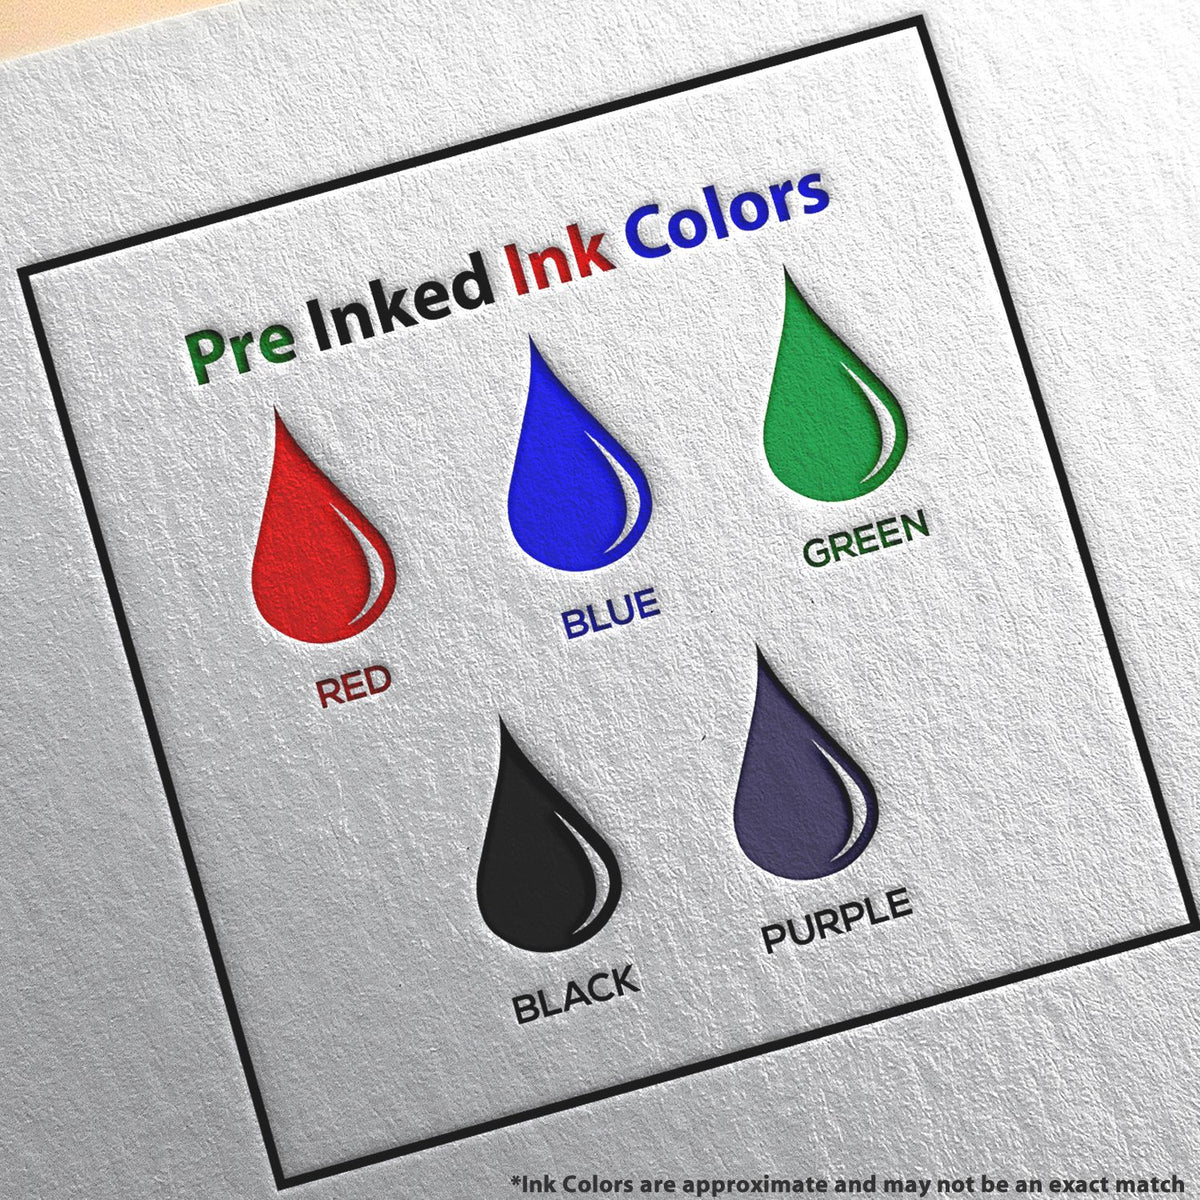 A picture showing the different ink colors or hues available for the Slim Pre-Inked Montana Professional Engineer Seal Stamp product.